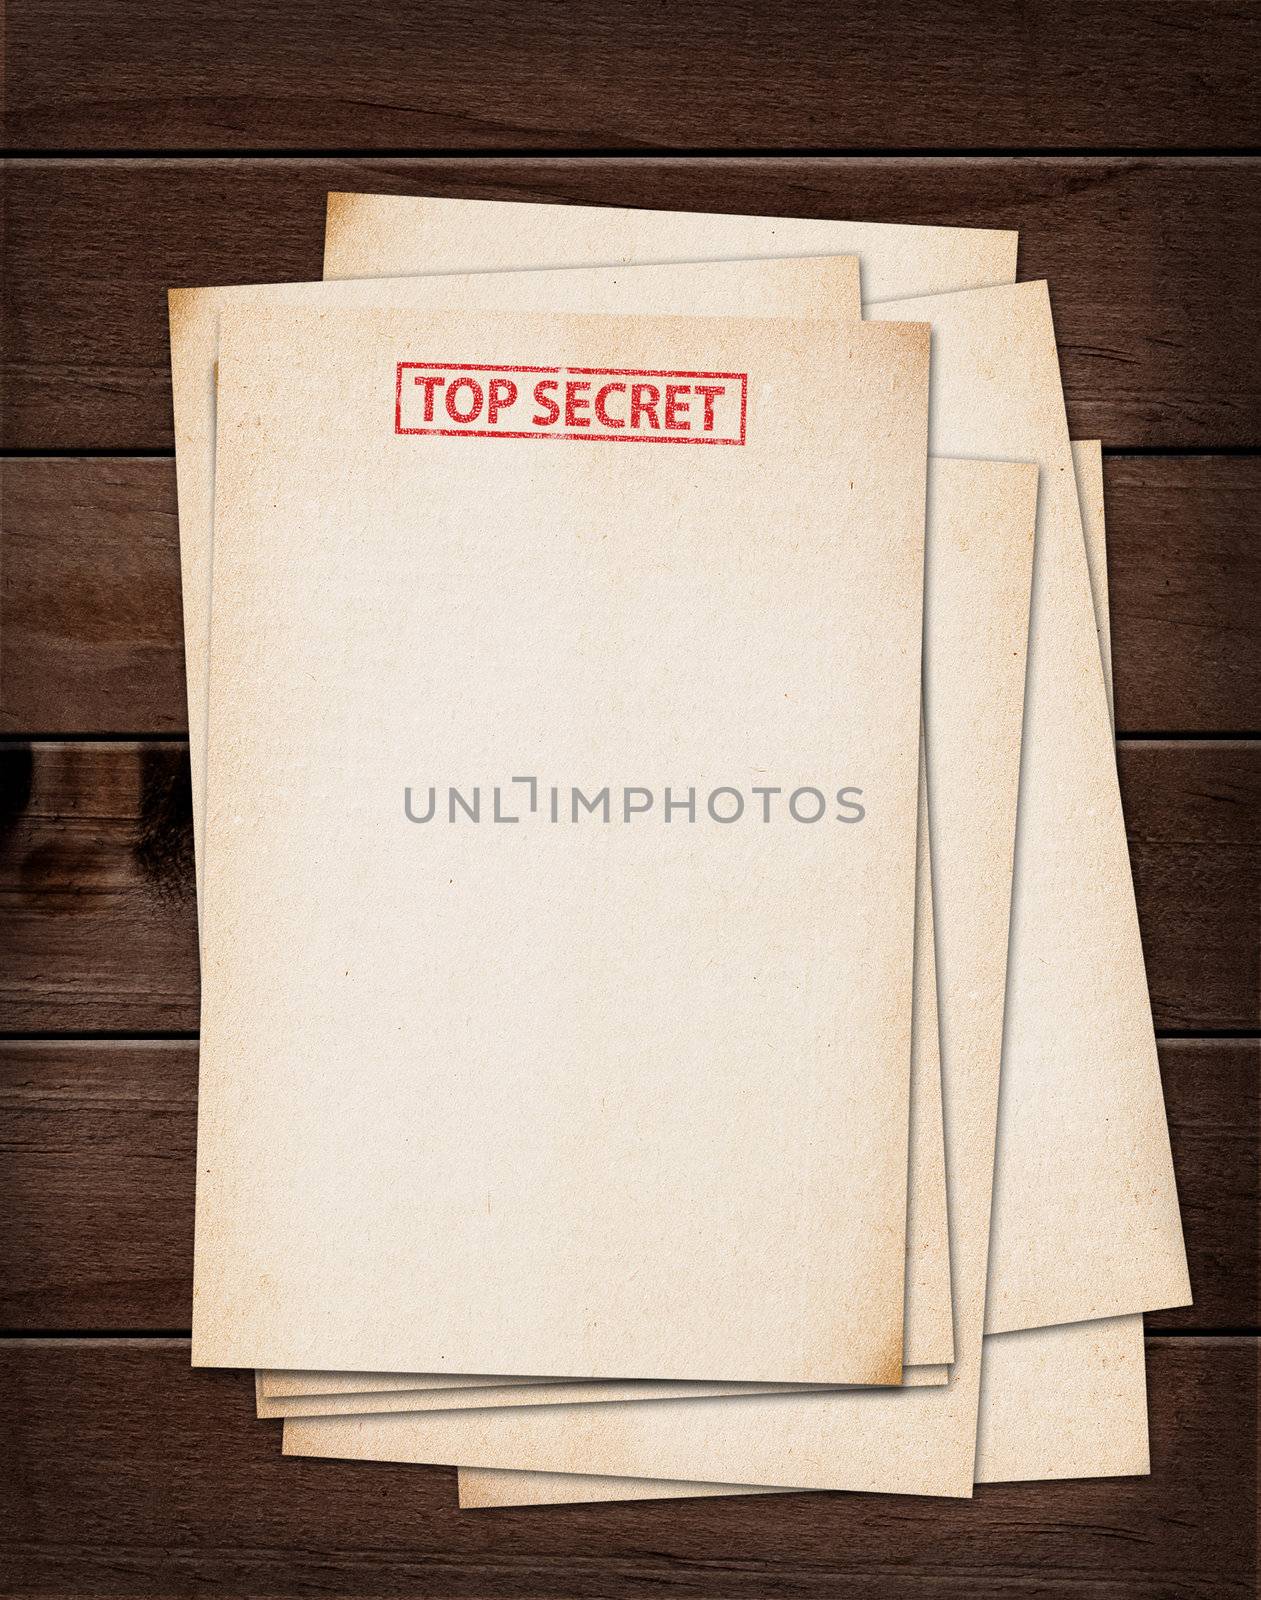 top secret files on wooden table.